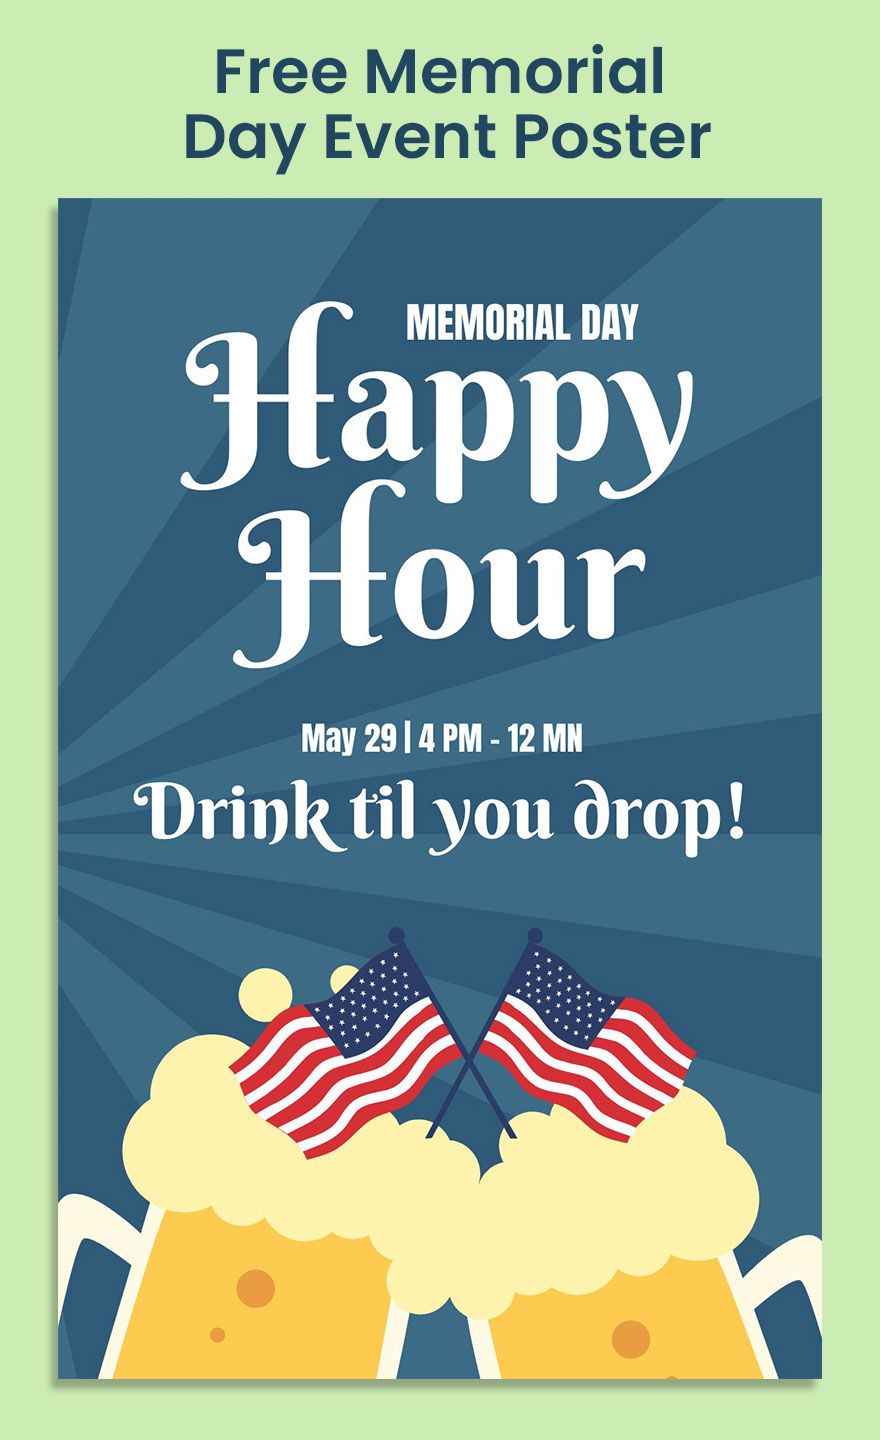 Memorial Day Event Poster